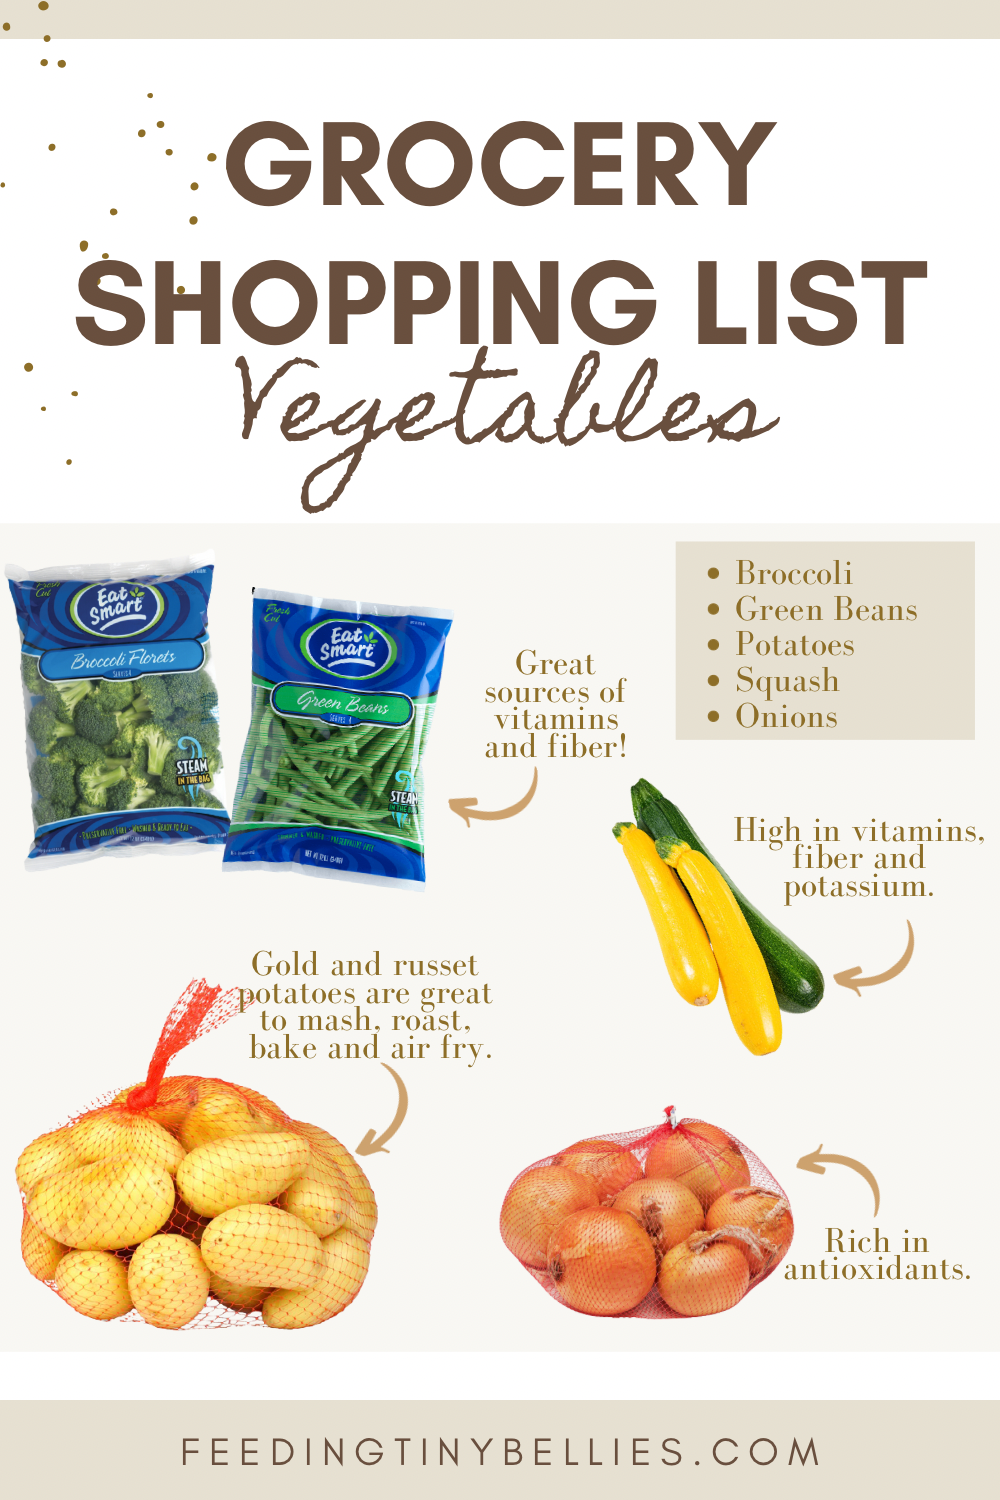 Grocery shopping list vegetables: broccoli, green beans, potatoes, squash and onions